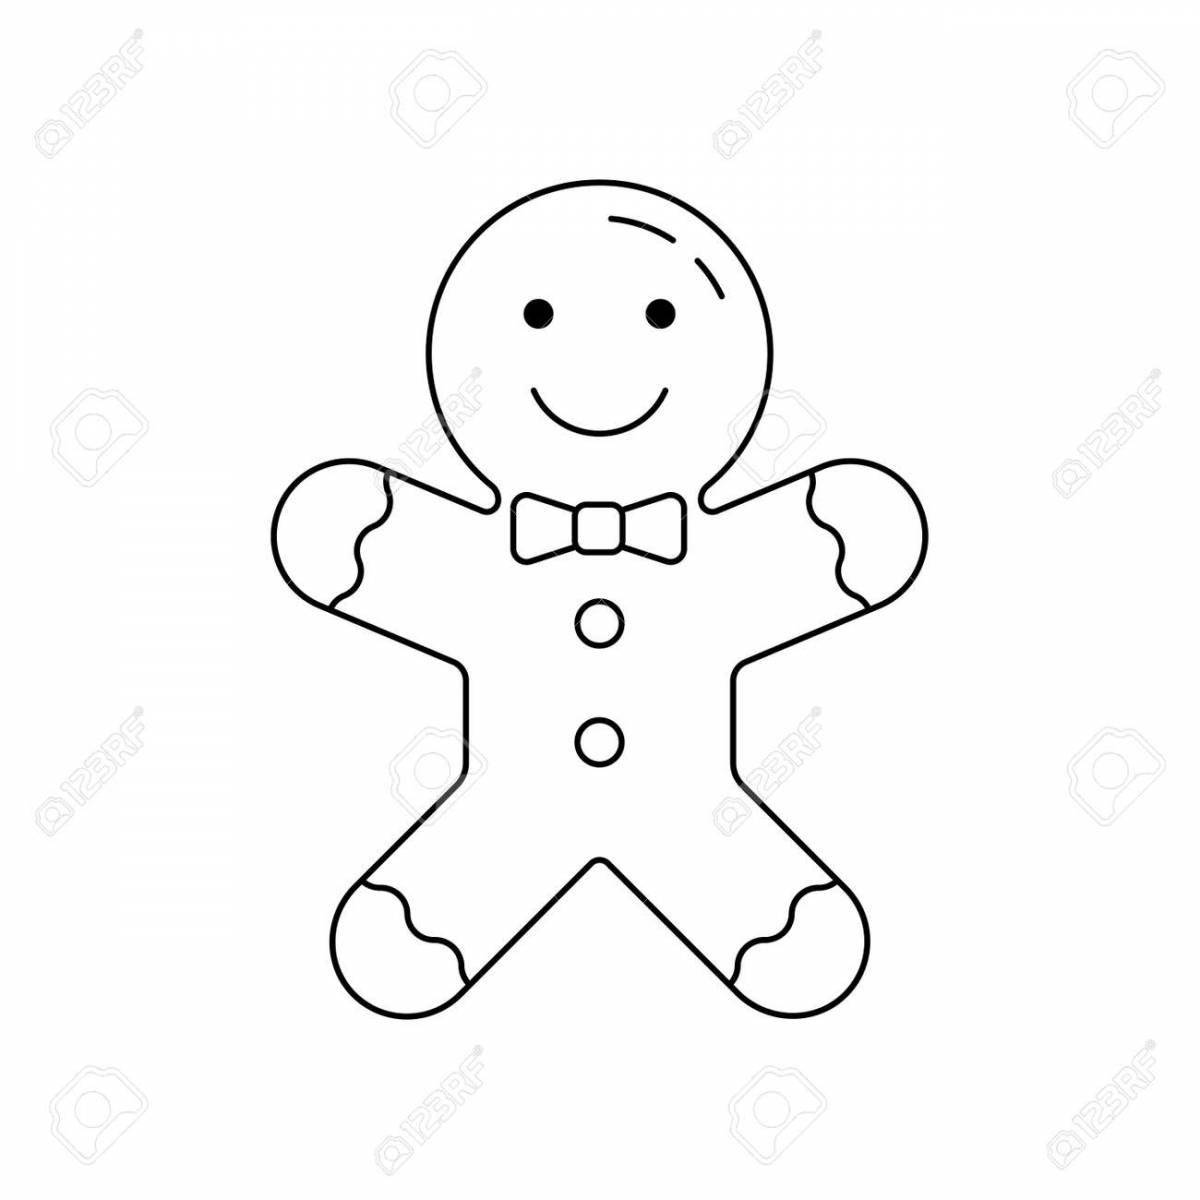 Gingerbread Instructions Coloring Page